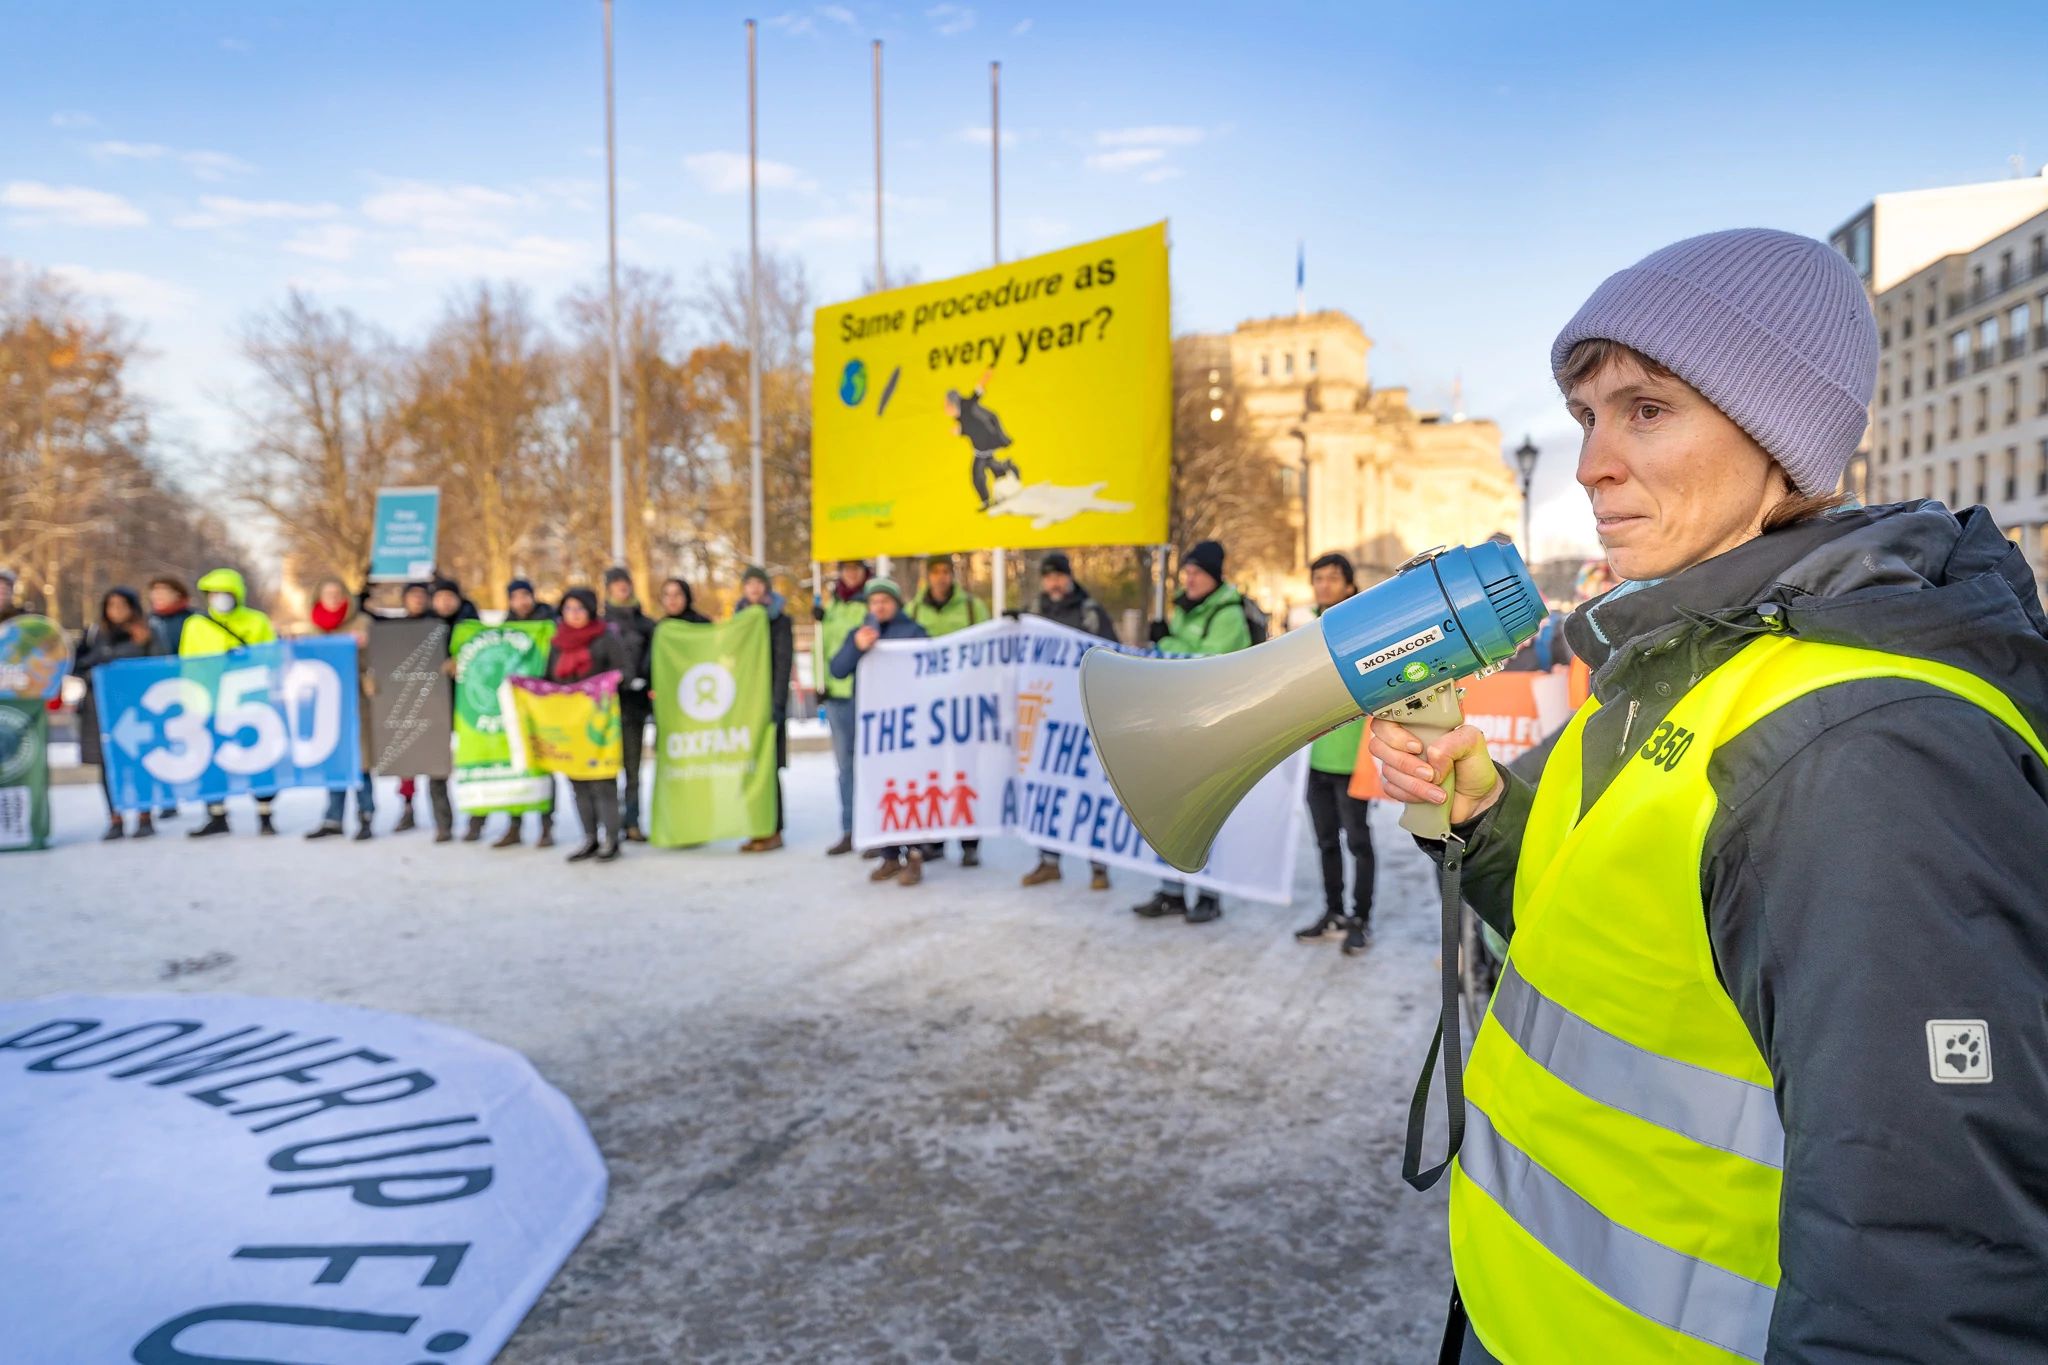 Berlin, Germany, December 1: while world leaders gather at COP28 in Dubai, climate activists hold a protest in Berlin to demand for corporations and the rich to pay for climate protection. Photo credit: Sabrina Gröschke